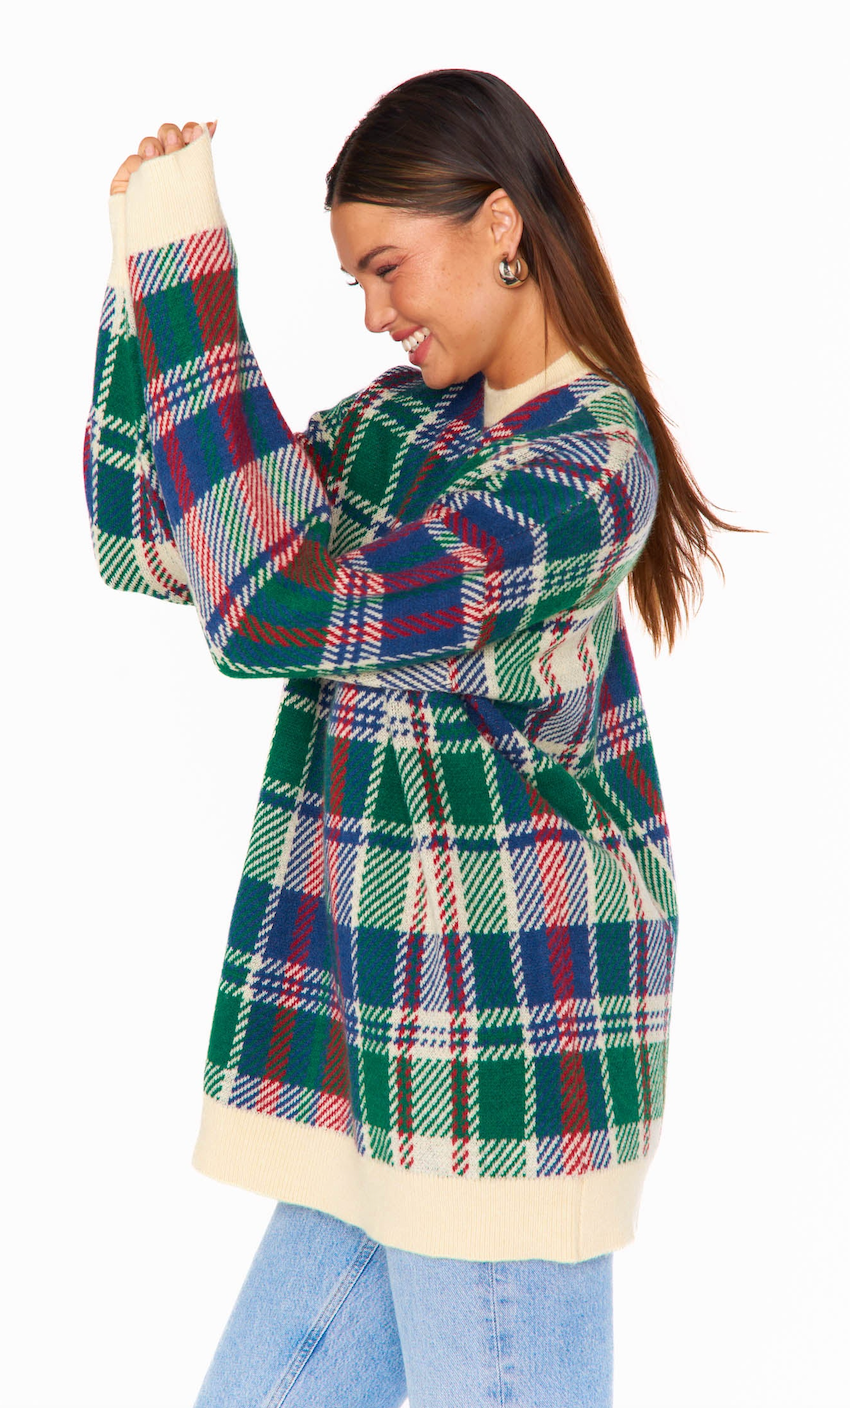 SHOW ME YOUR MUMU EMBER TUNIC SWEATER IN HOLIDAY PLAID KNIT